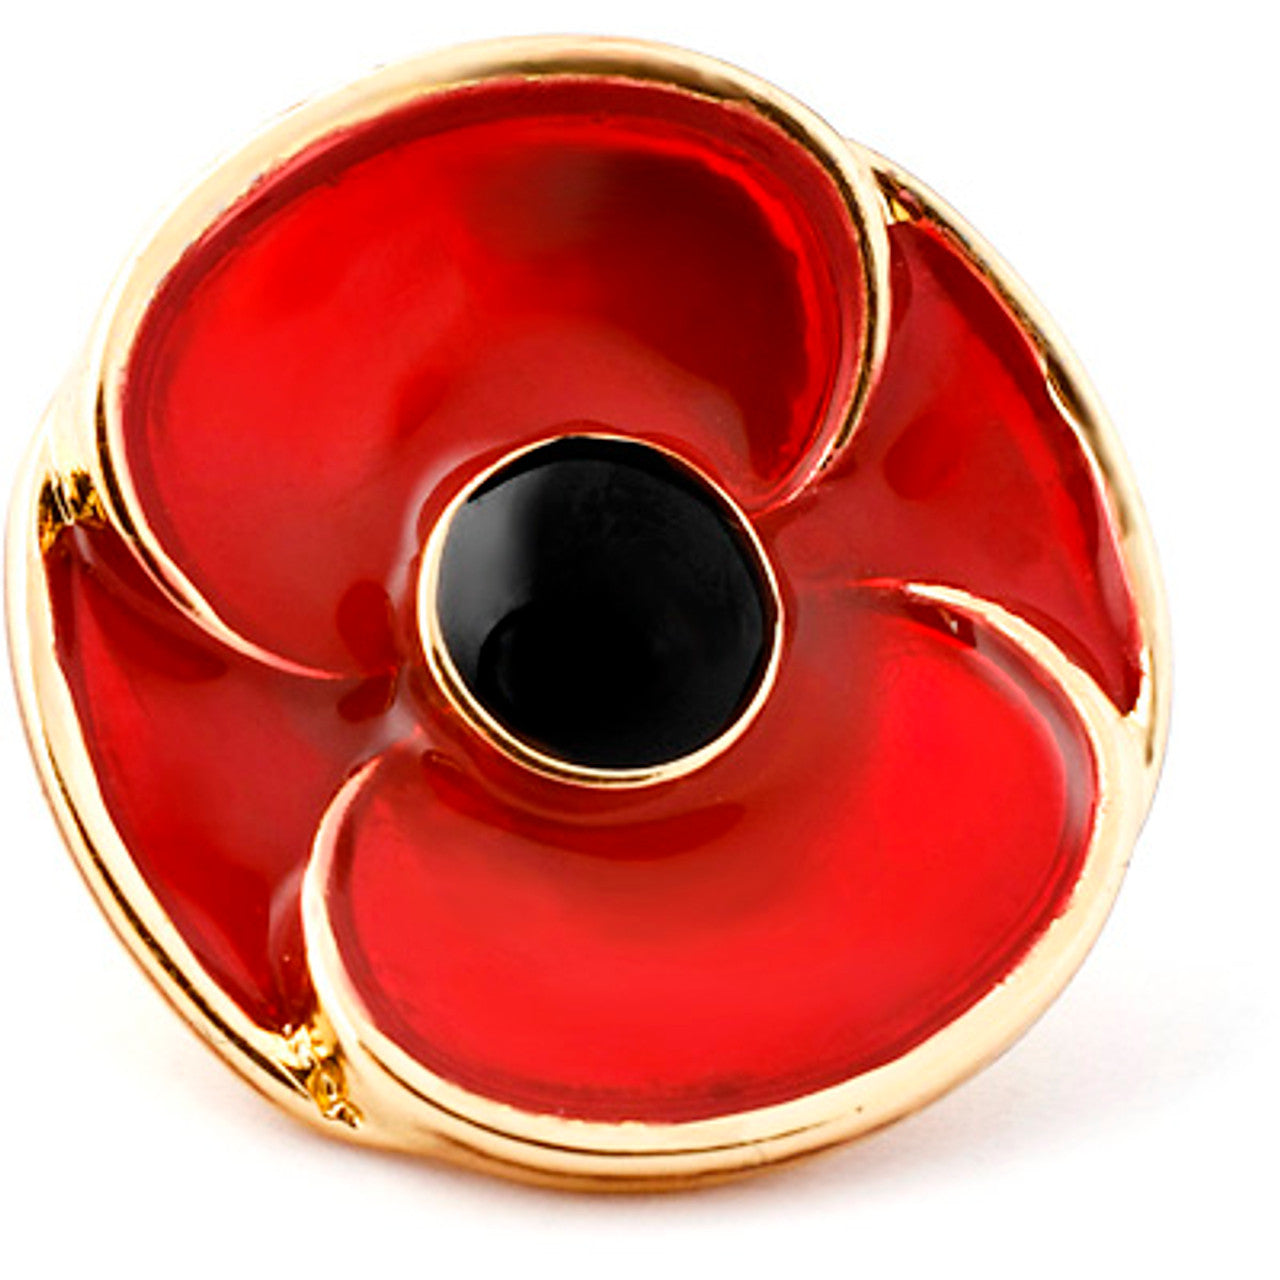 The beautiful 3D Poppy Recollections Lapel Pin.  A modern interpretation of the classical poppy. This 20mm three-dimensional (3D) Poppy Recollections translucent lapel pin is classically inspired designer fashion. Gold plate finish for everyday wear. Carry forward the tradition. www.defenceqstore.com.au